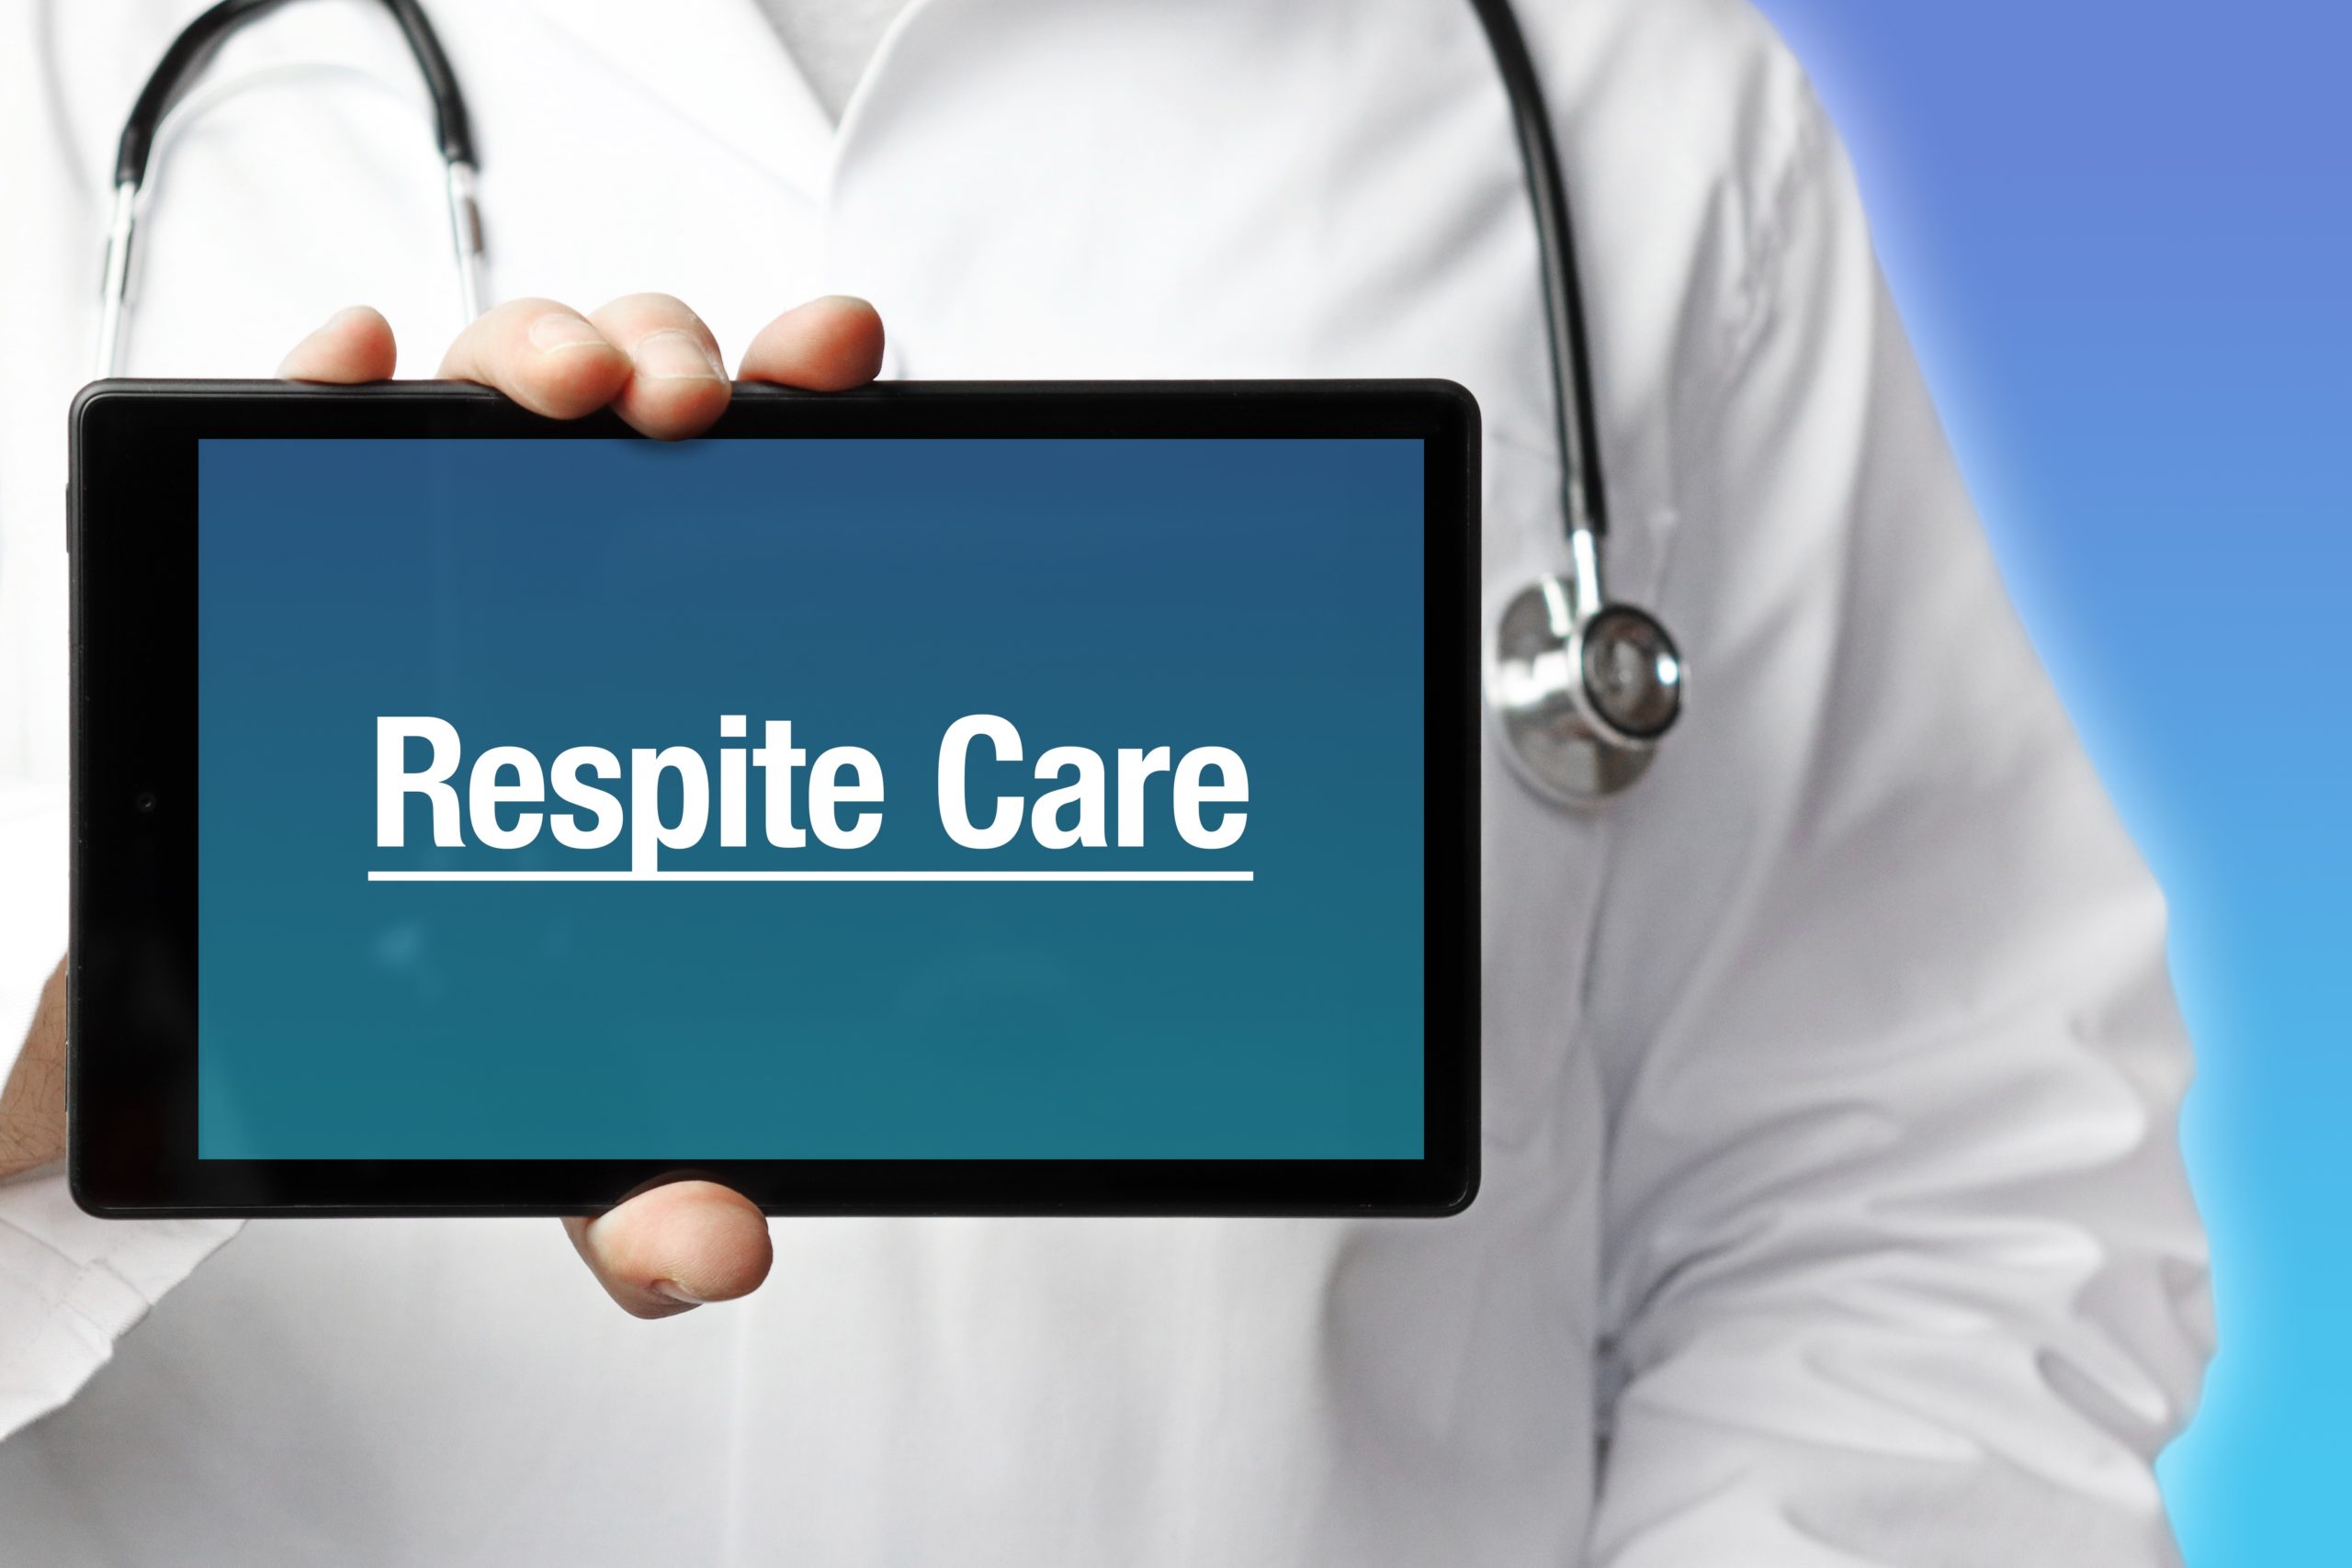 How is Respite Care Different from Personal Care